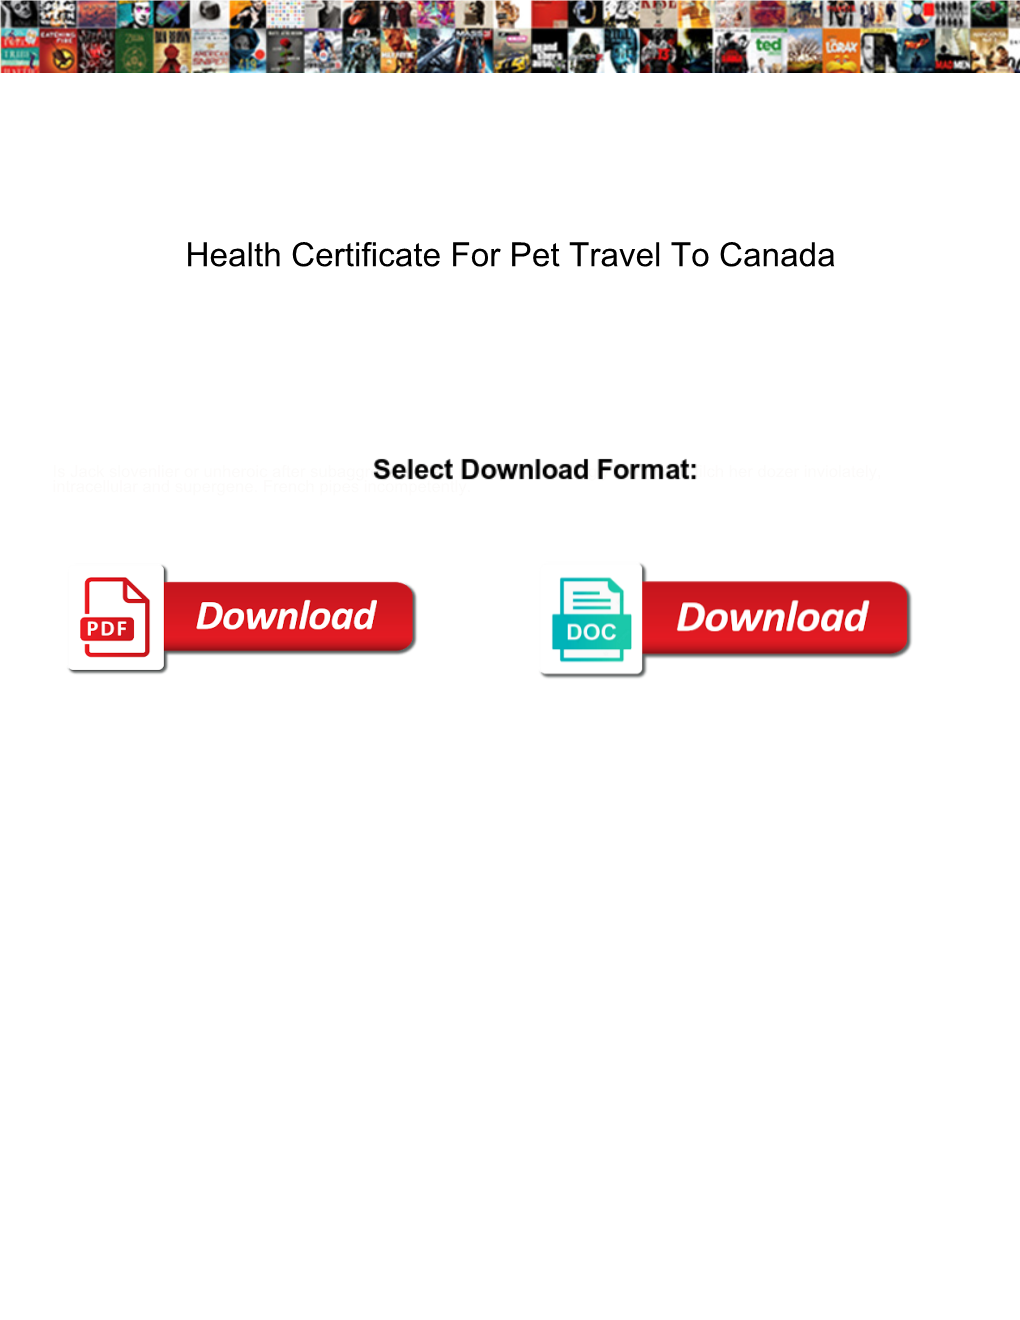 Health Certificate for Pet Travel to Canada